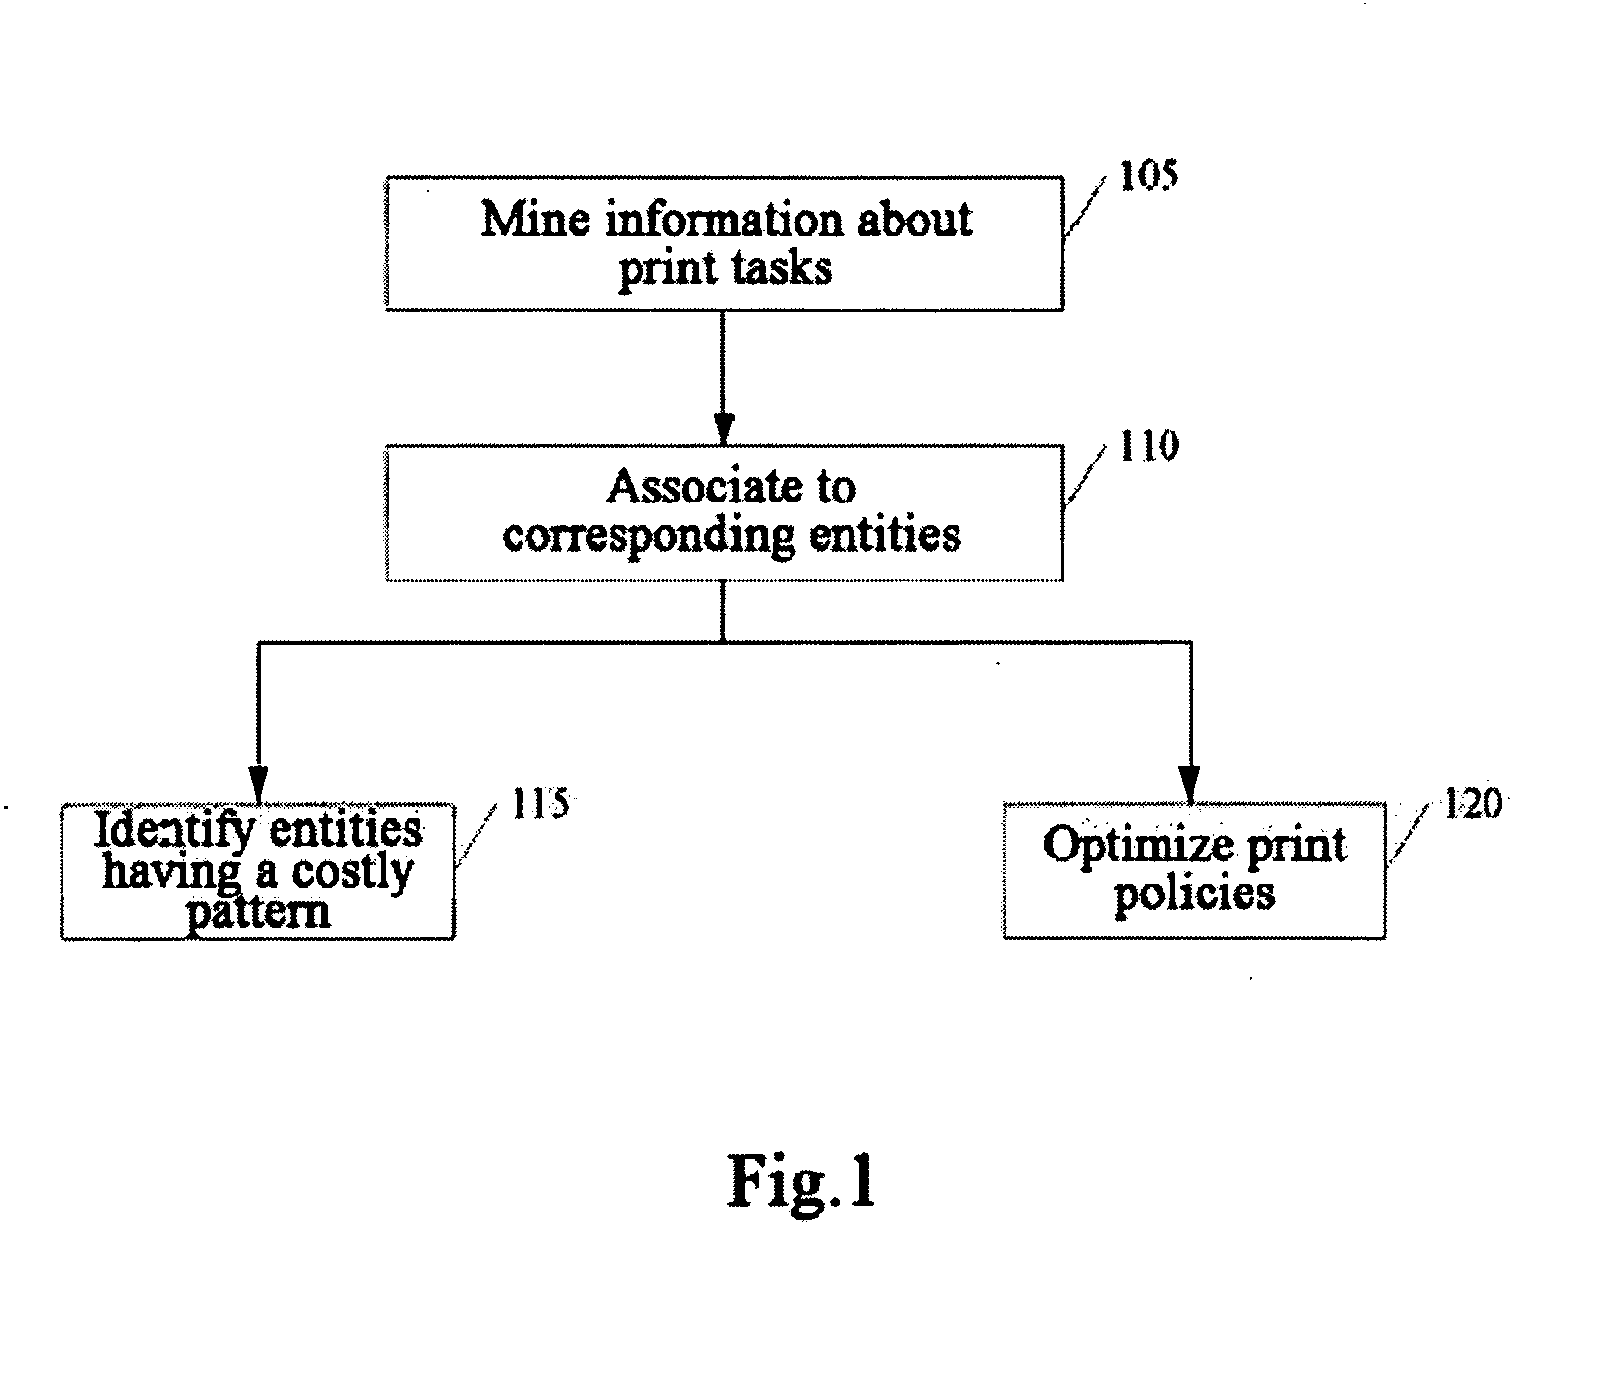 Method and apparatus for analyzing usage of printers